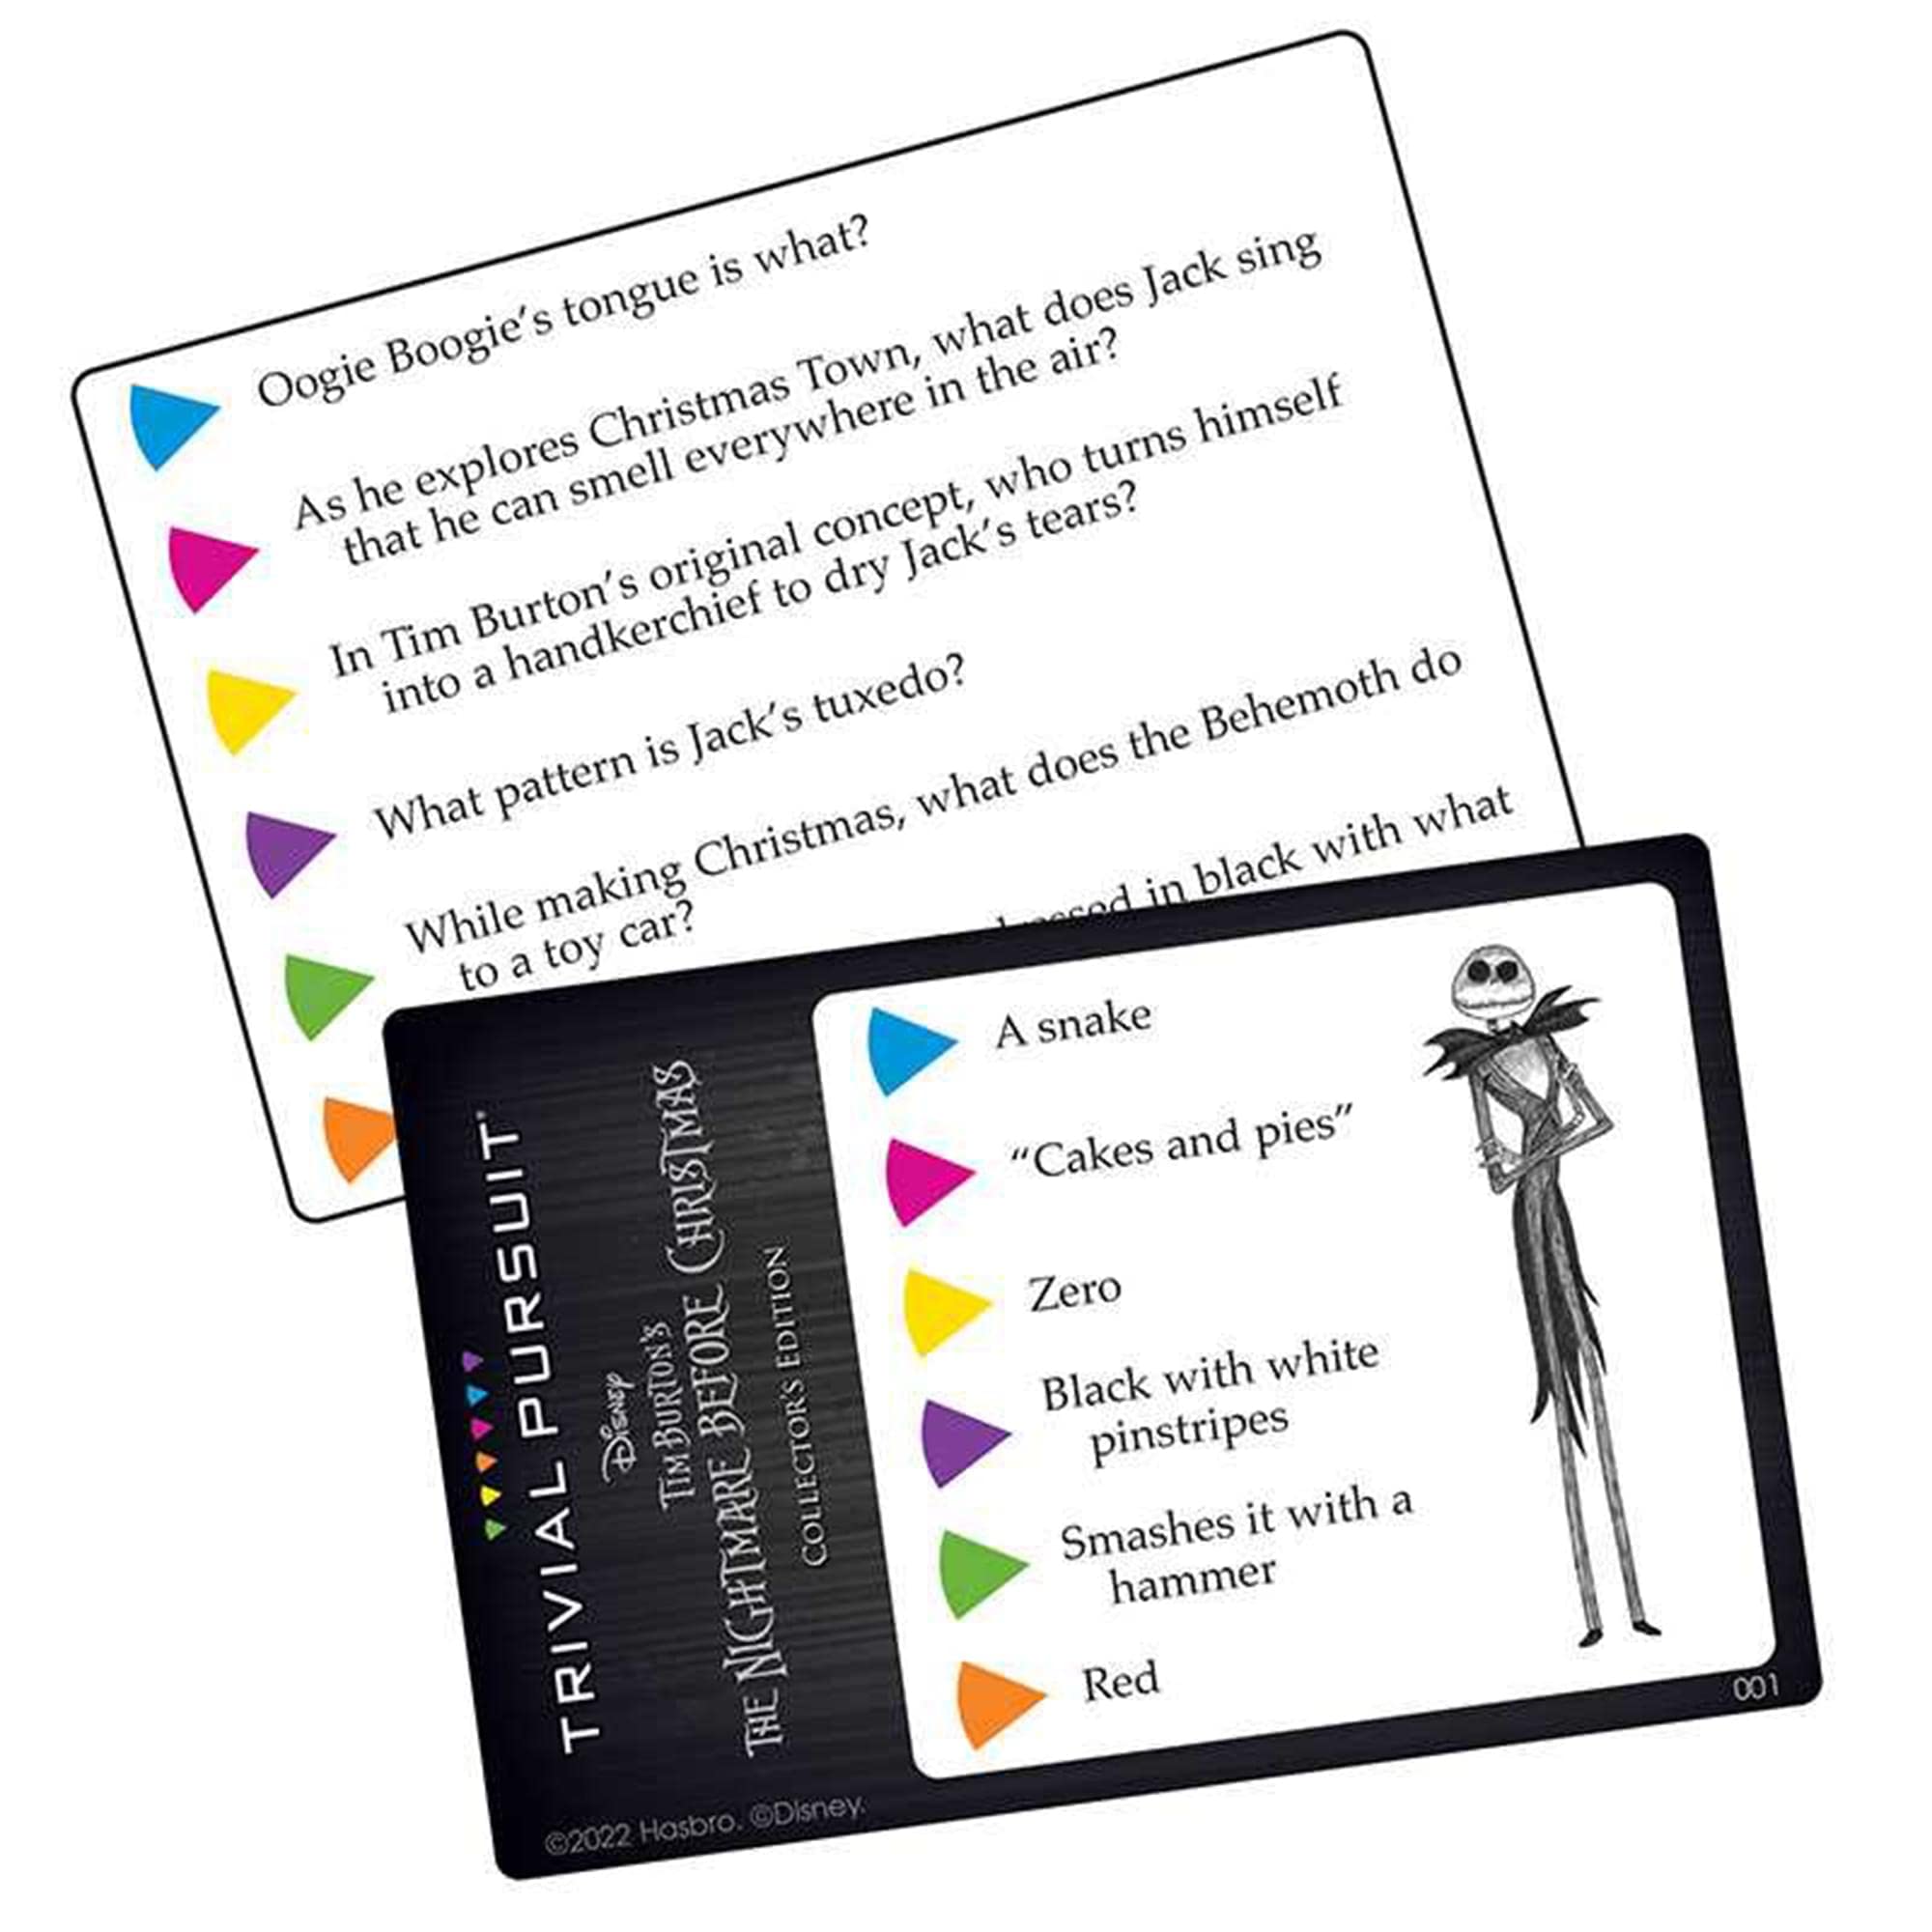 TRIVIAL PURSUIT: Disney Tim Burton’s The Nightmare Before Christmas | Collectible Trivia Board Game Featuring 420 Questions from Classic Stopmotion Film | Officially-Licensed Disney Game & Merchandise